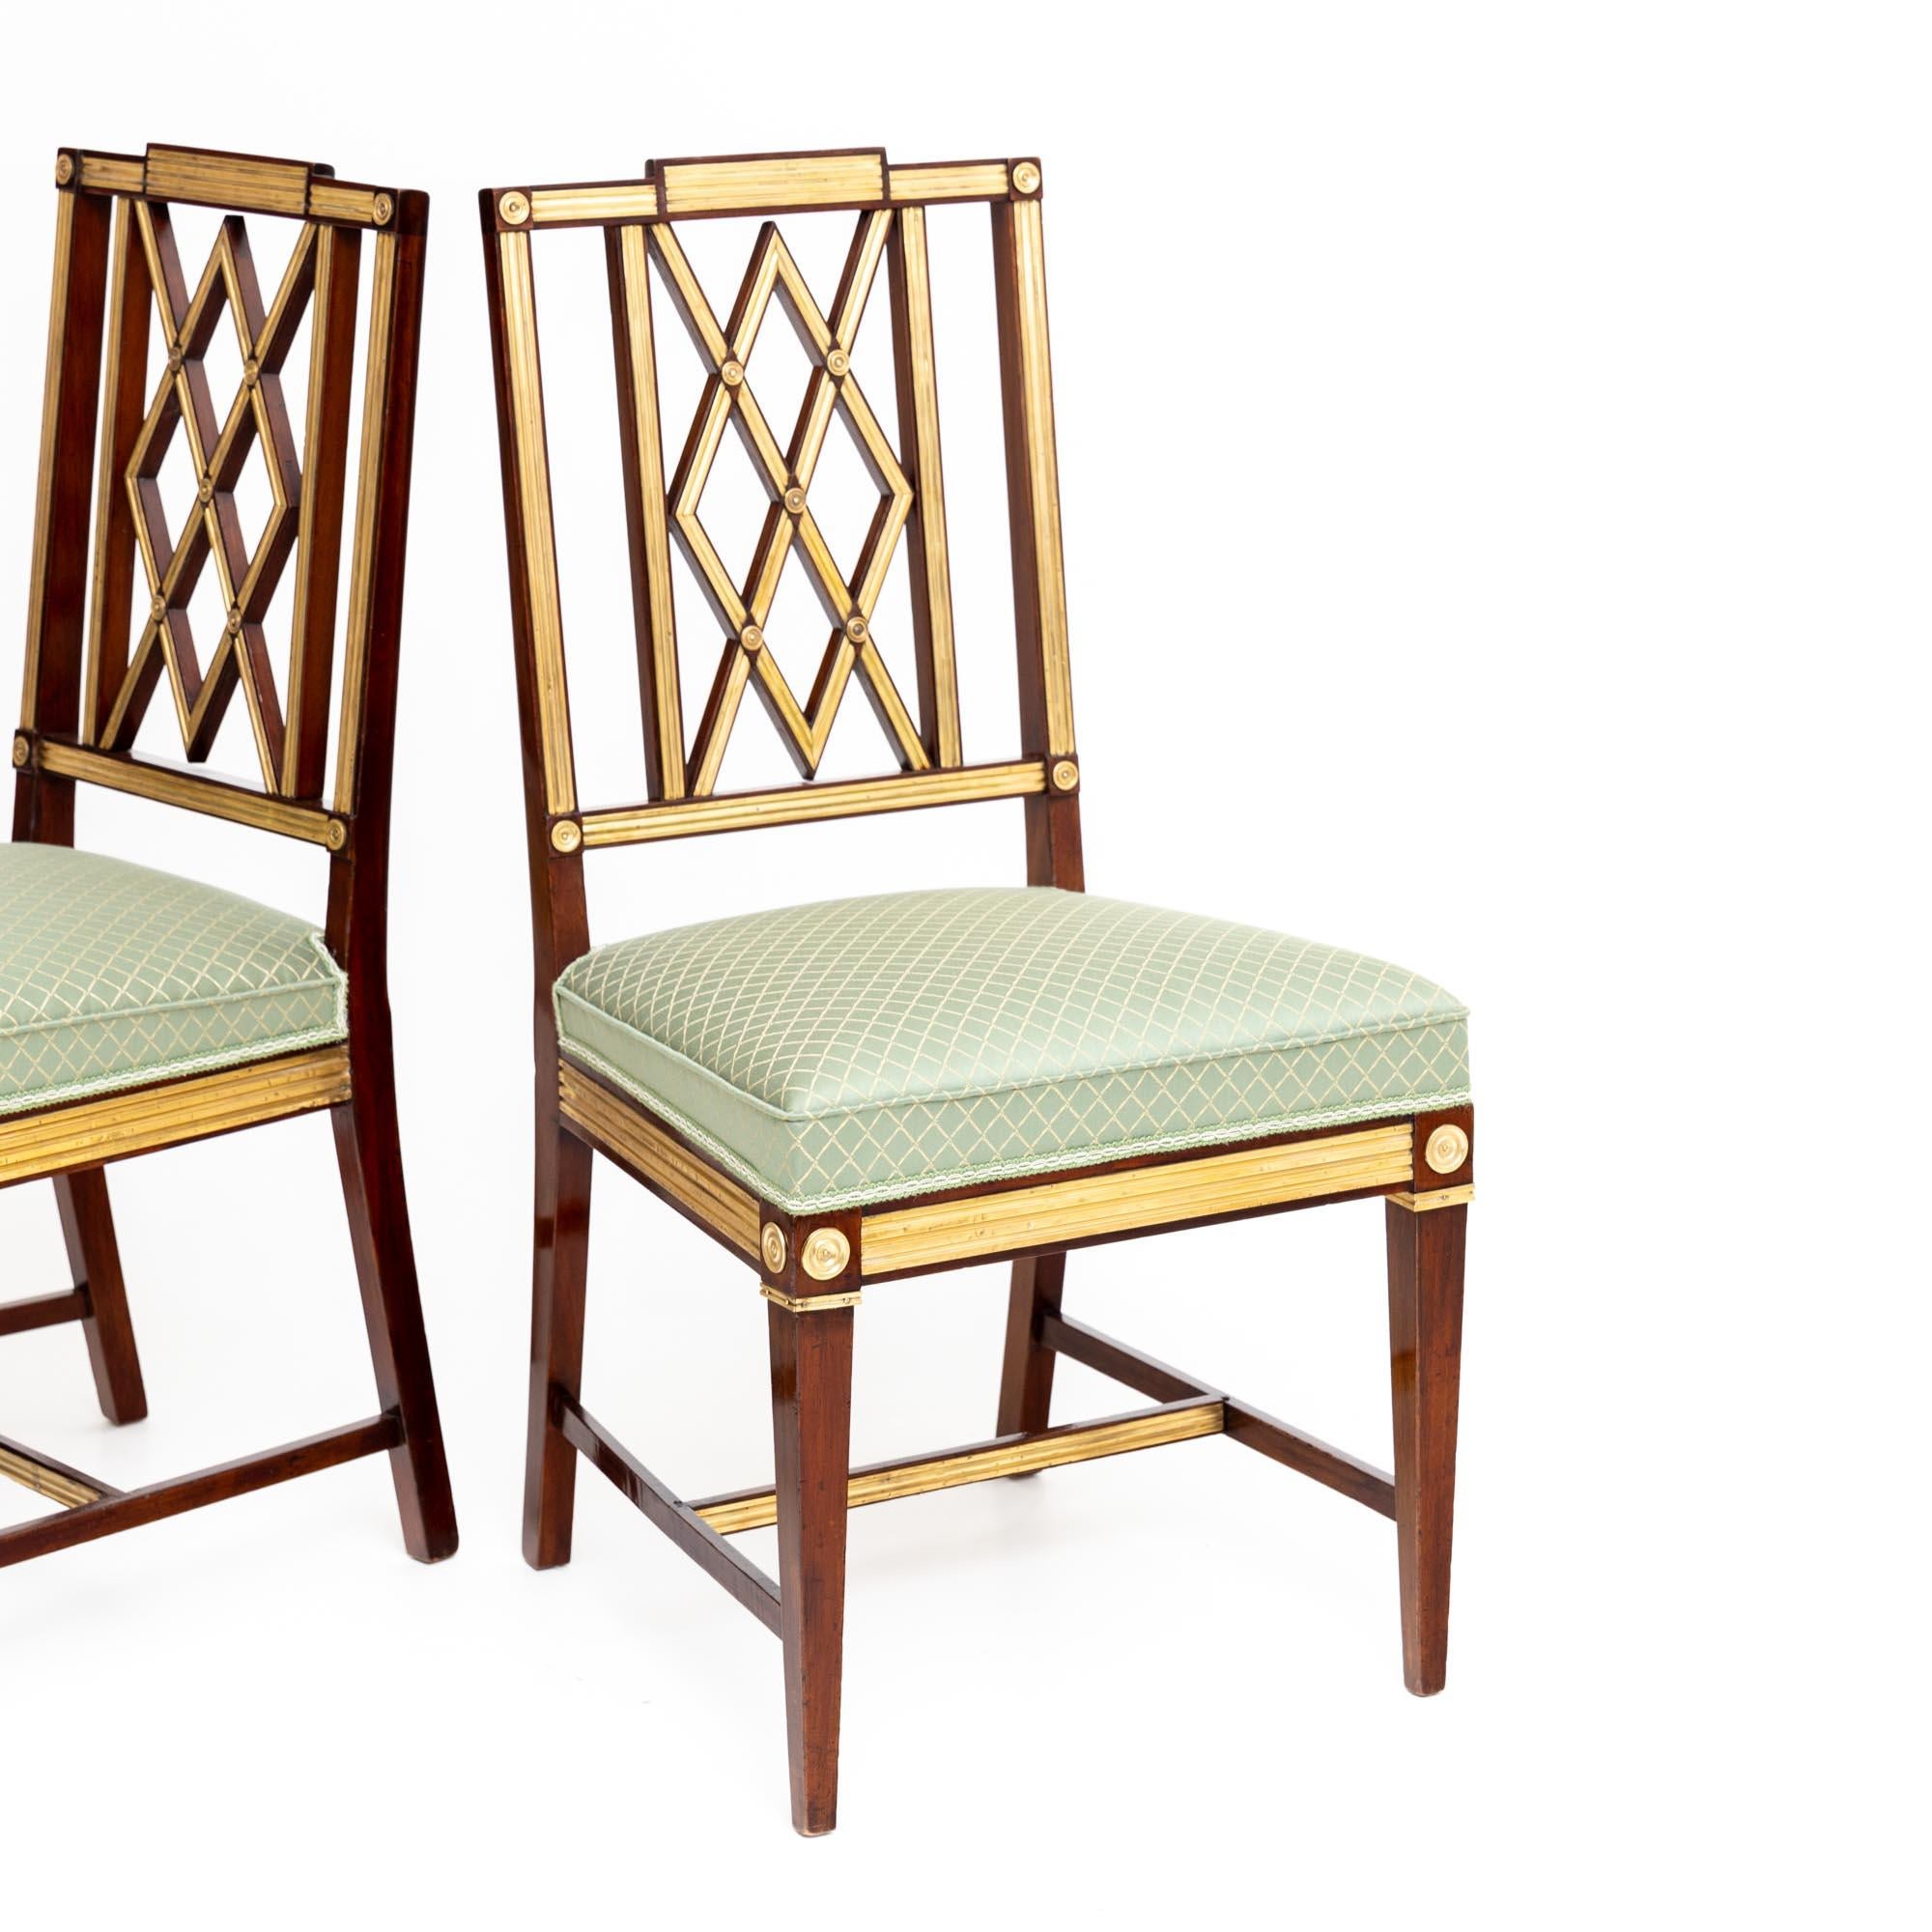 Set of three neoclassical dining chairs made of mahogany with brass decoration and diamond shaped backrest. The chairs stand on square legs with H-shaped bracing. The seats are upholstered and covered with a high-quality light green fabric with a